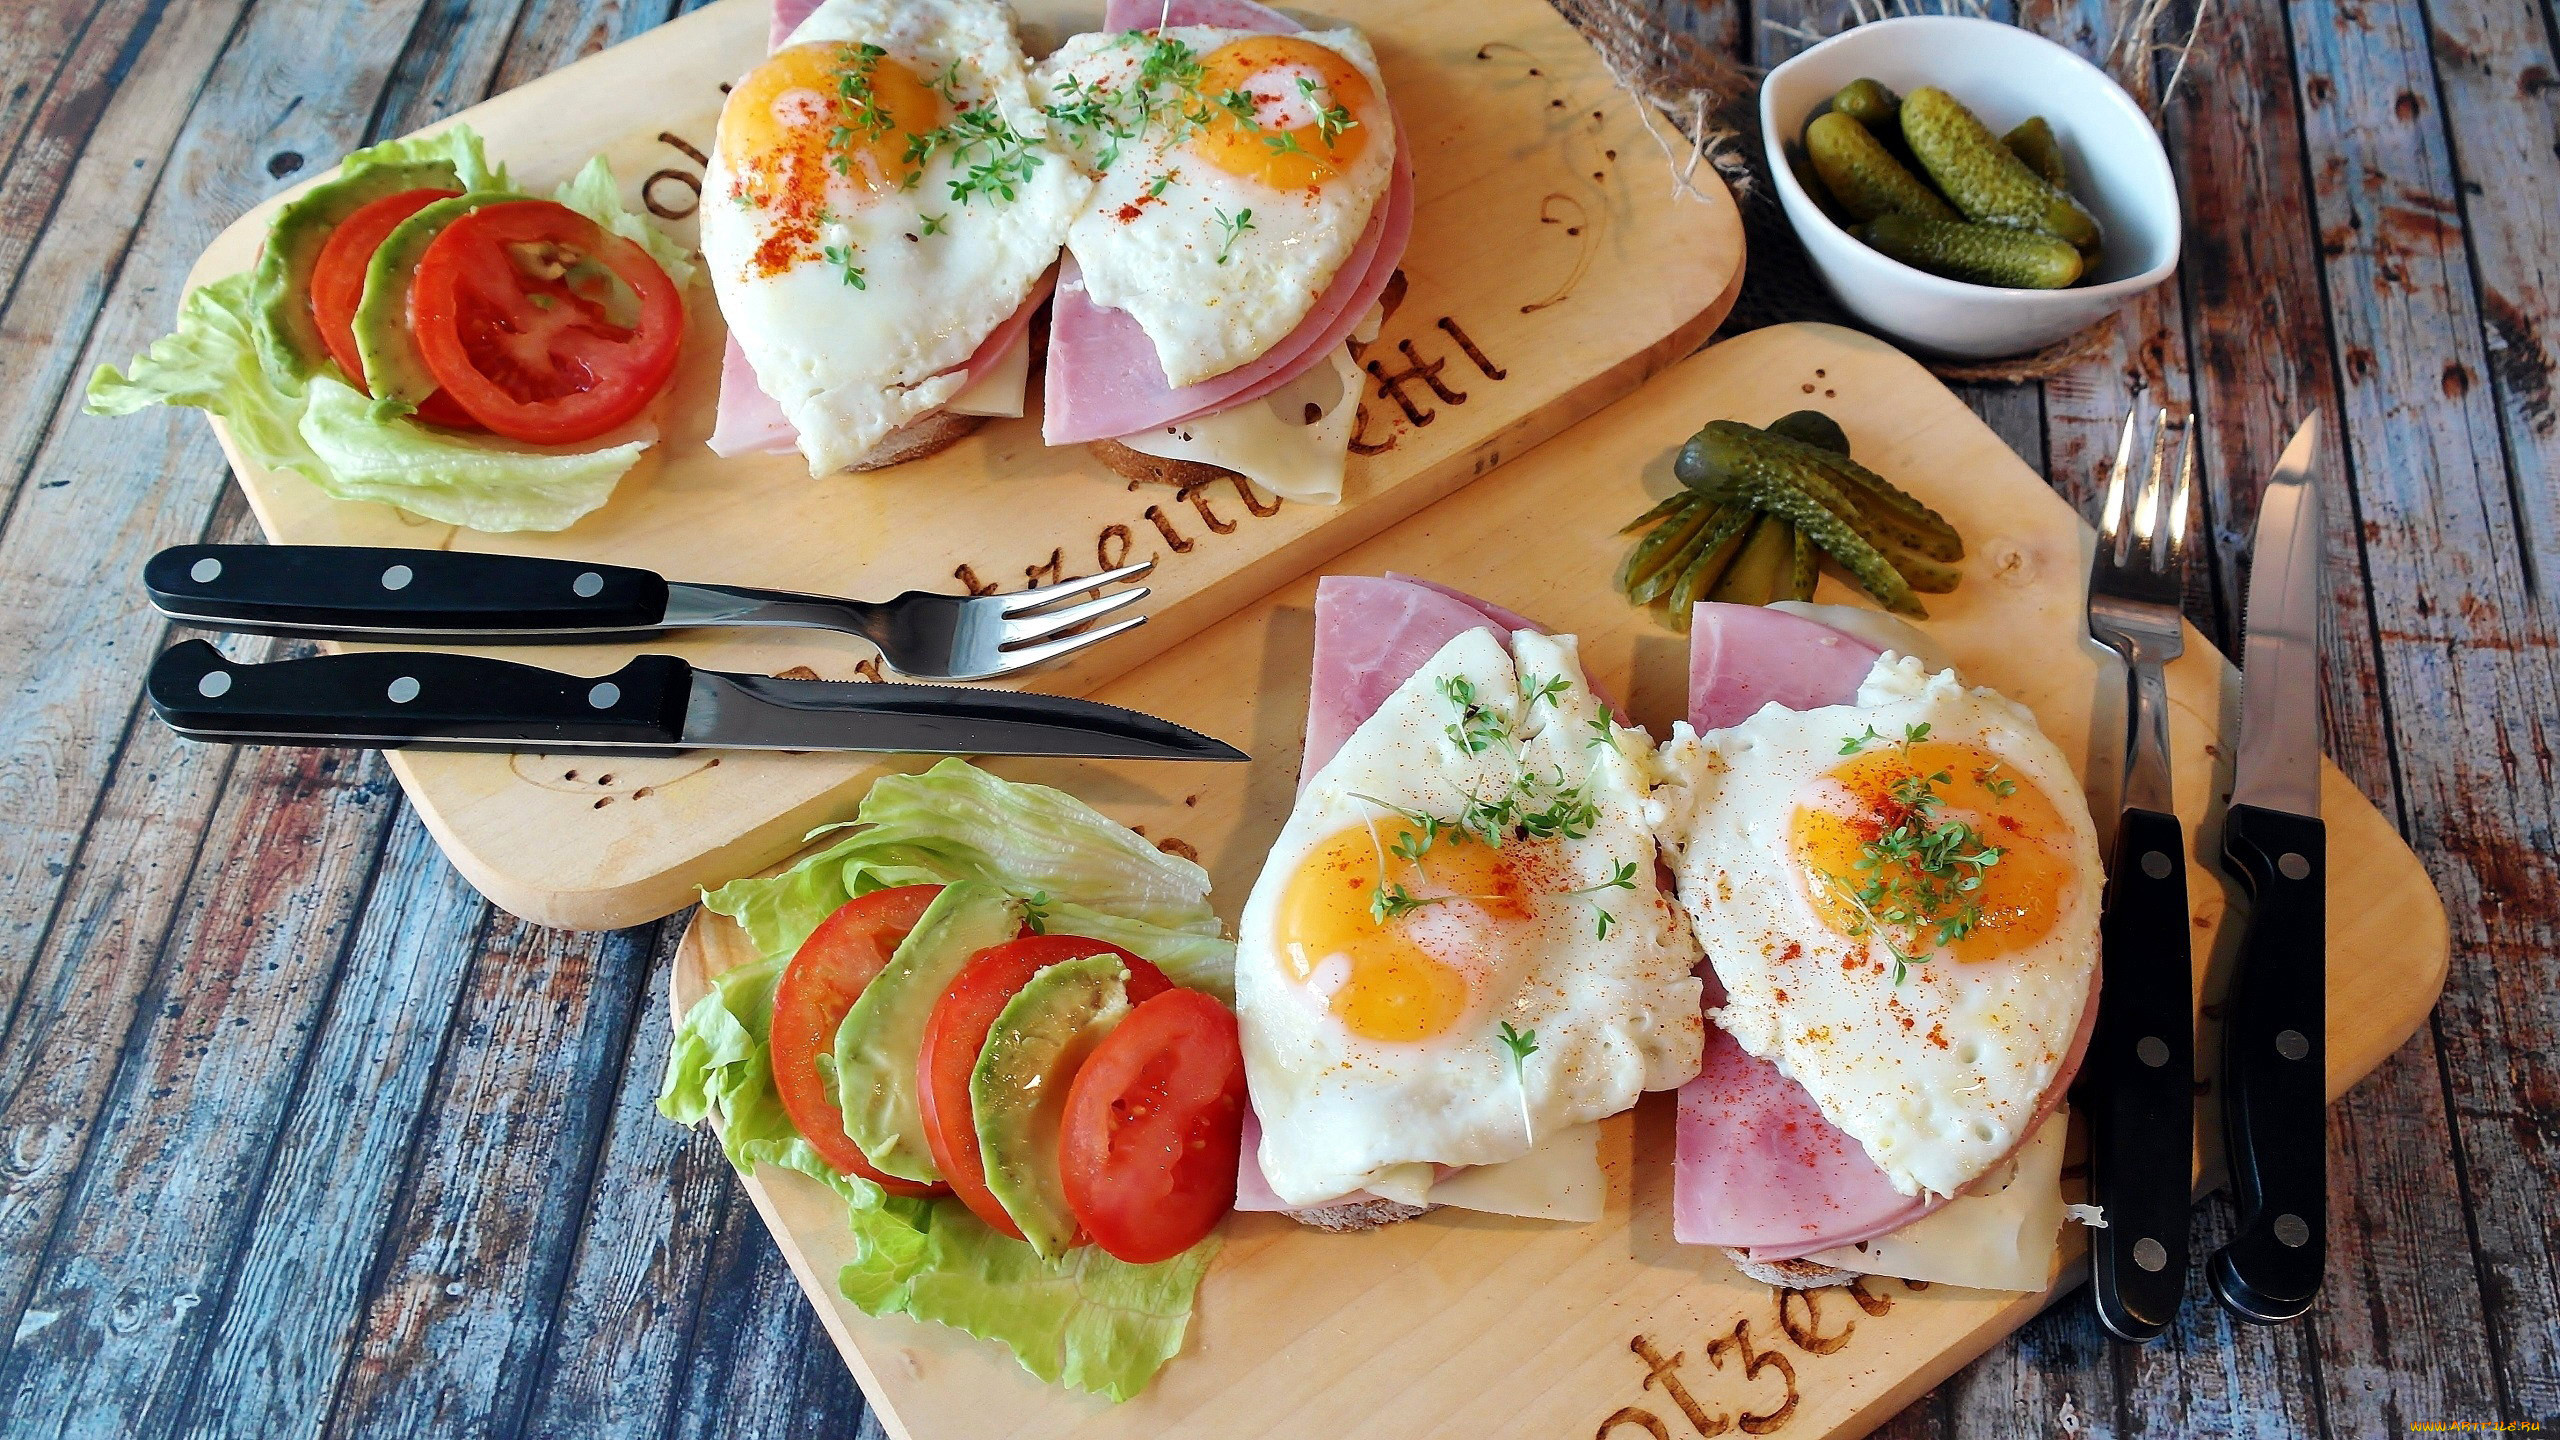 Food Eggs Tomatoes Breakfast Wooden Surface Cutting Board Fork Table Knife Lettuce Cheese Ham Bread  2560x1440